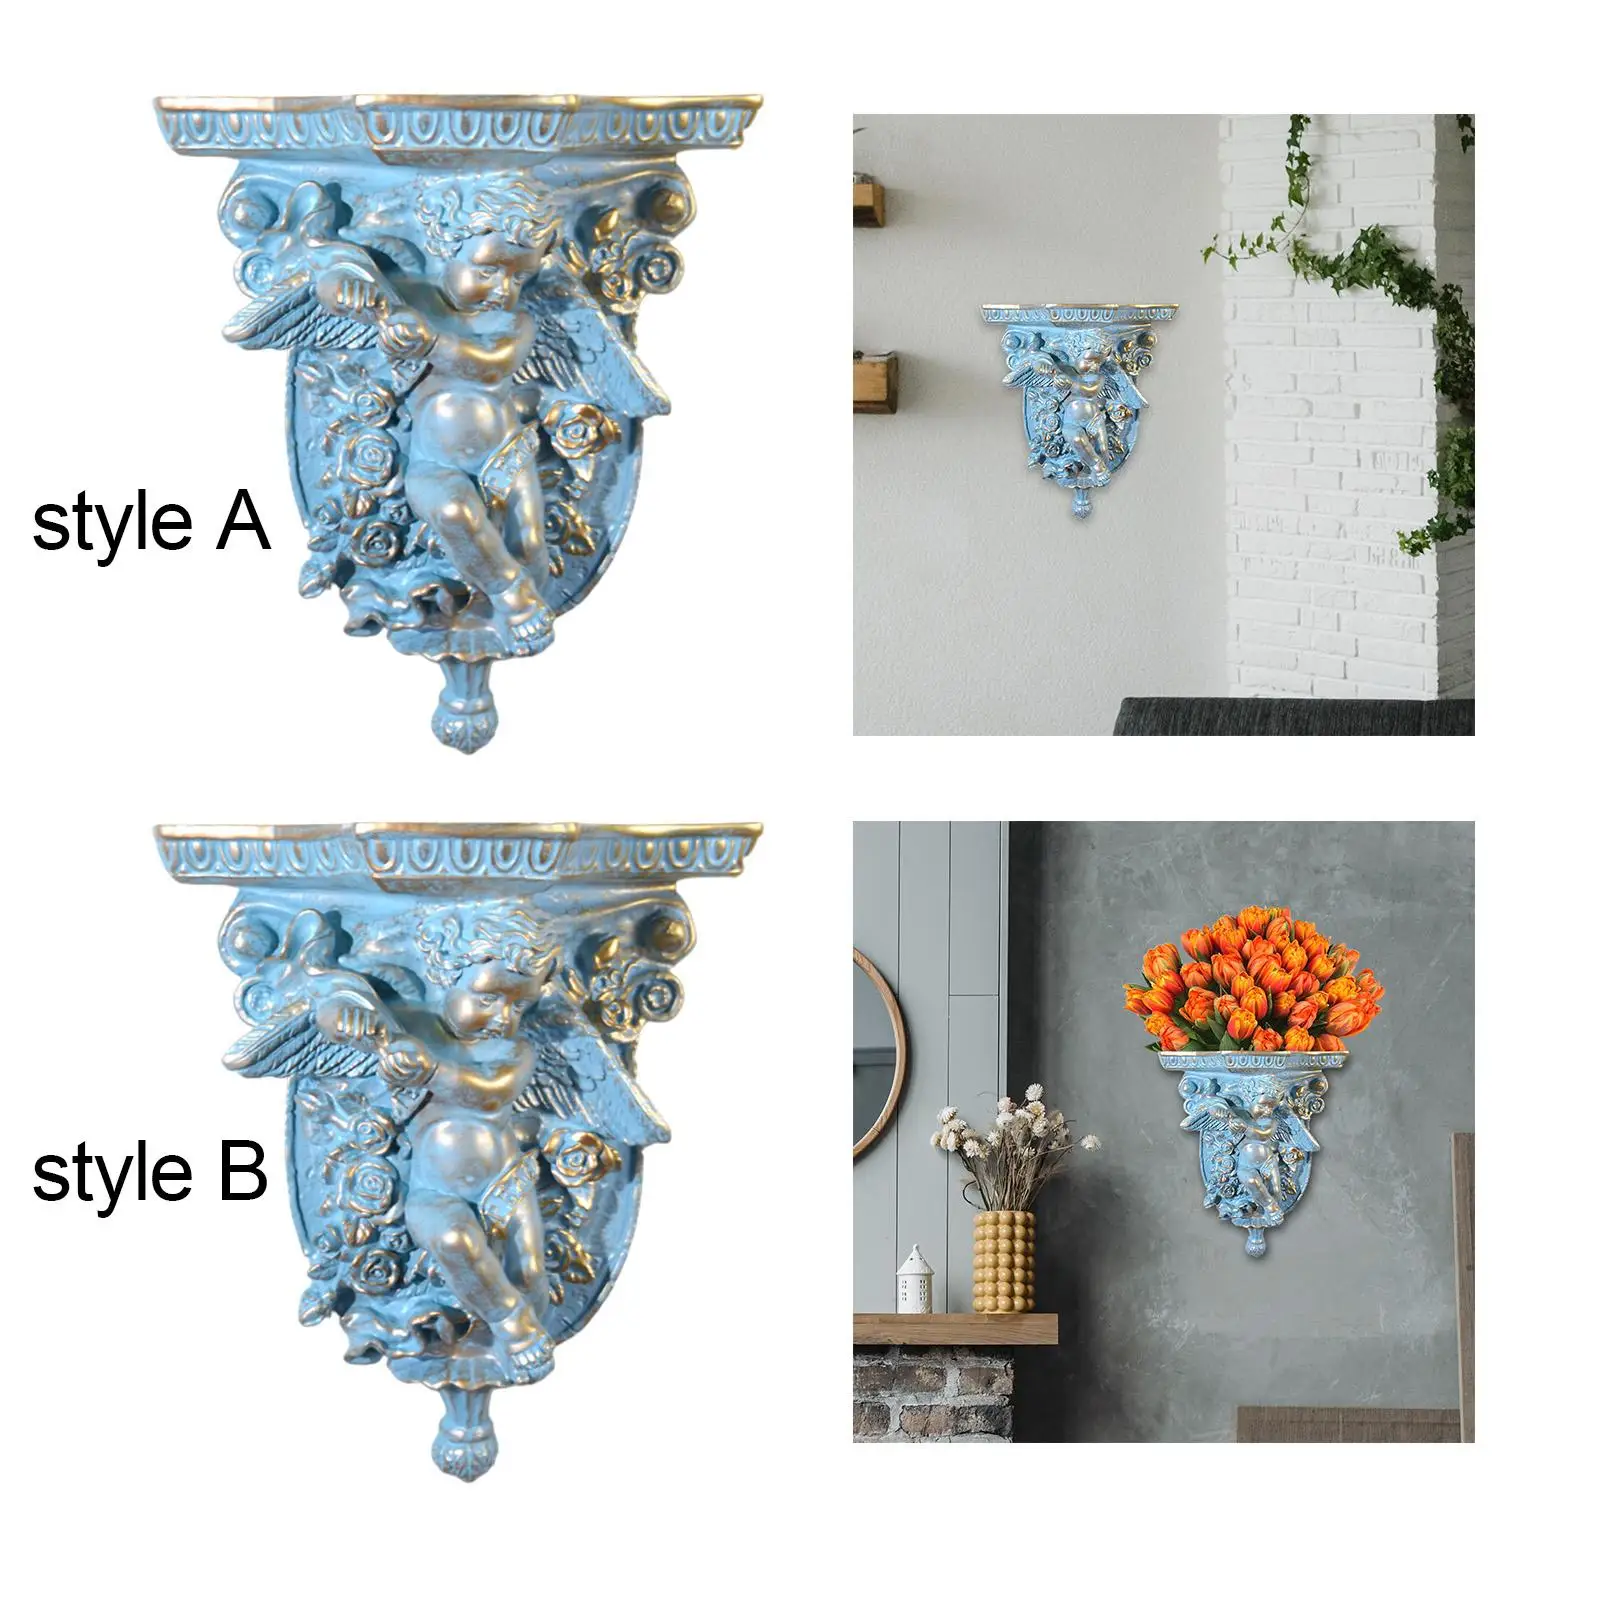 Retro Floating Shelves Decorative Flower Pot Stand Holder Wall Organizer Hollow Flower Carving Wall Art for Living Room Office